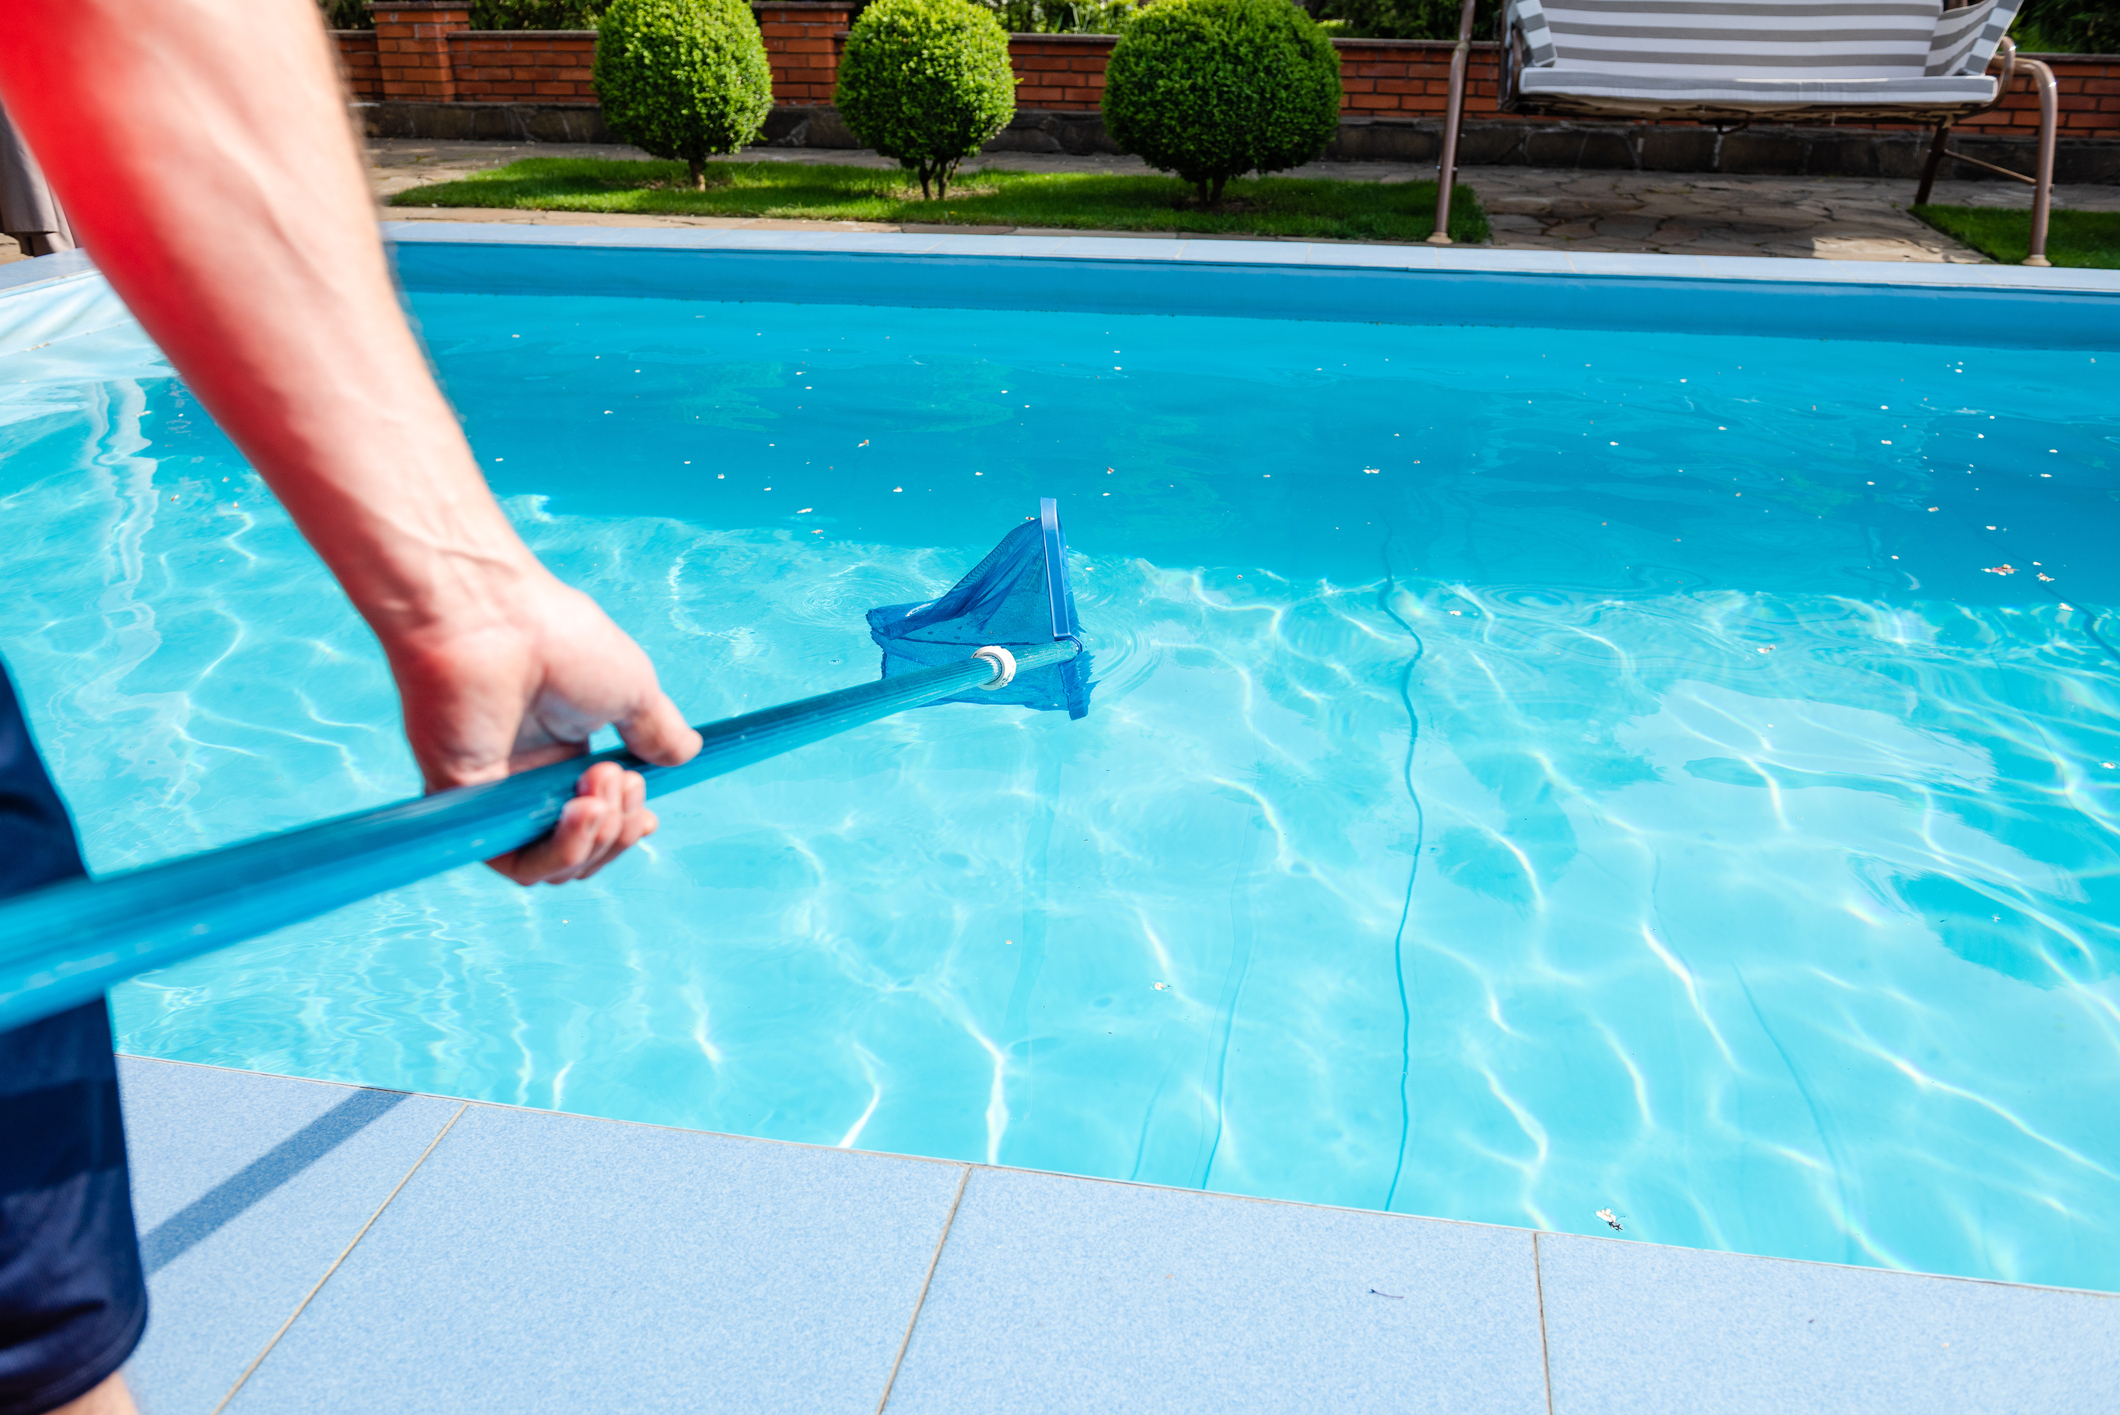 Questions to Ask Before Hiring Swimming Pool Companies